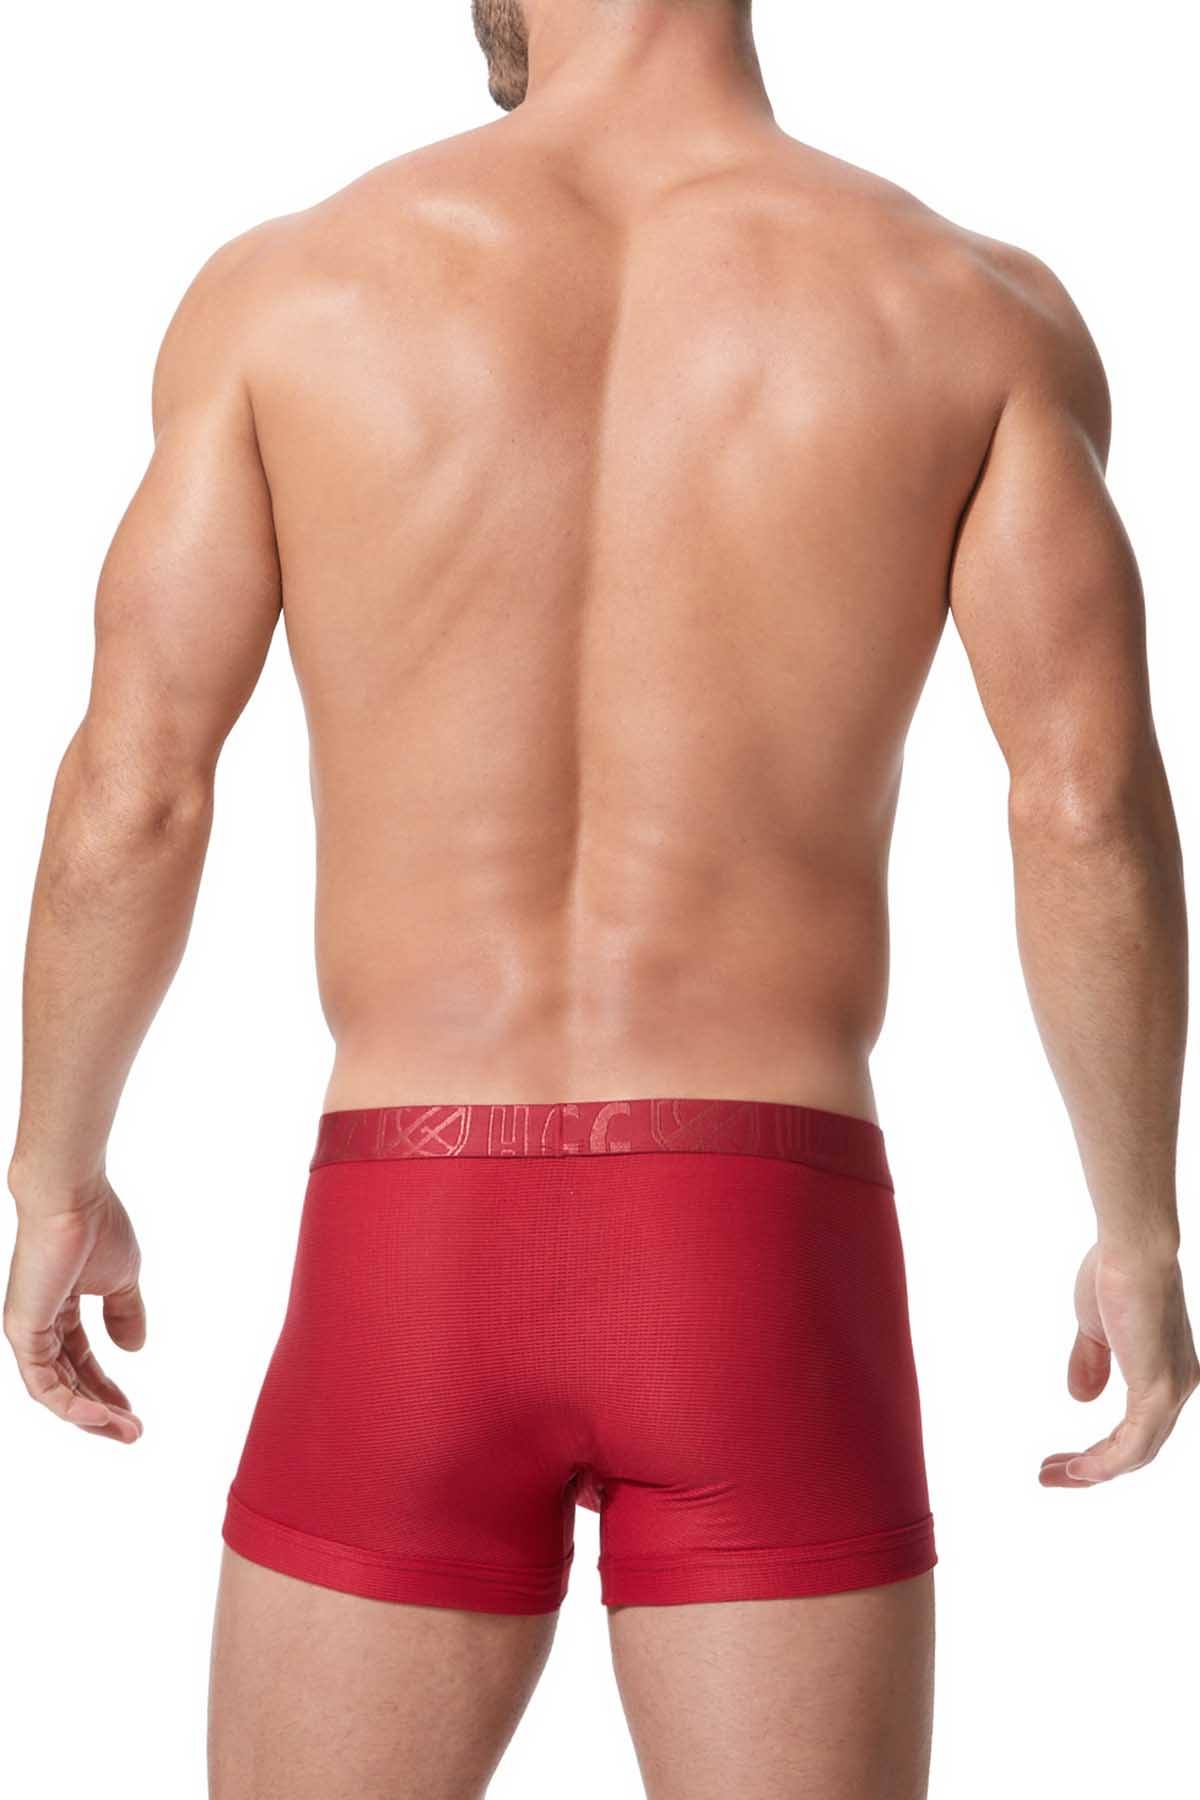 Gregg Homme Red Micro-Modal/Jacquard Xcite Long-Trunk